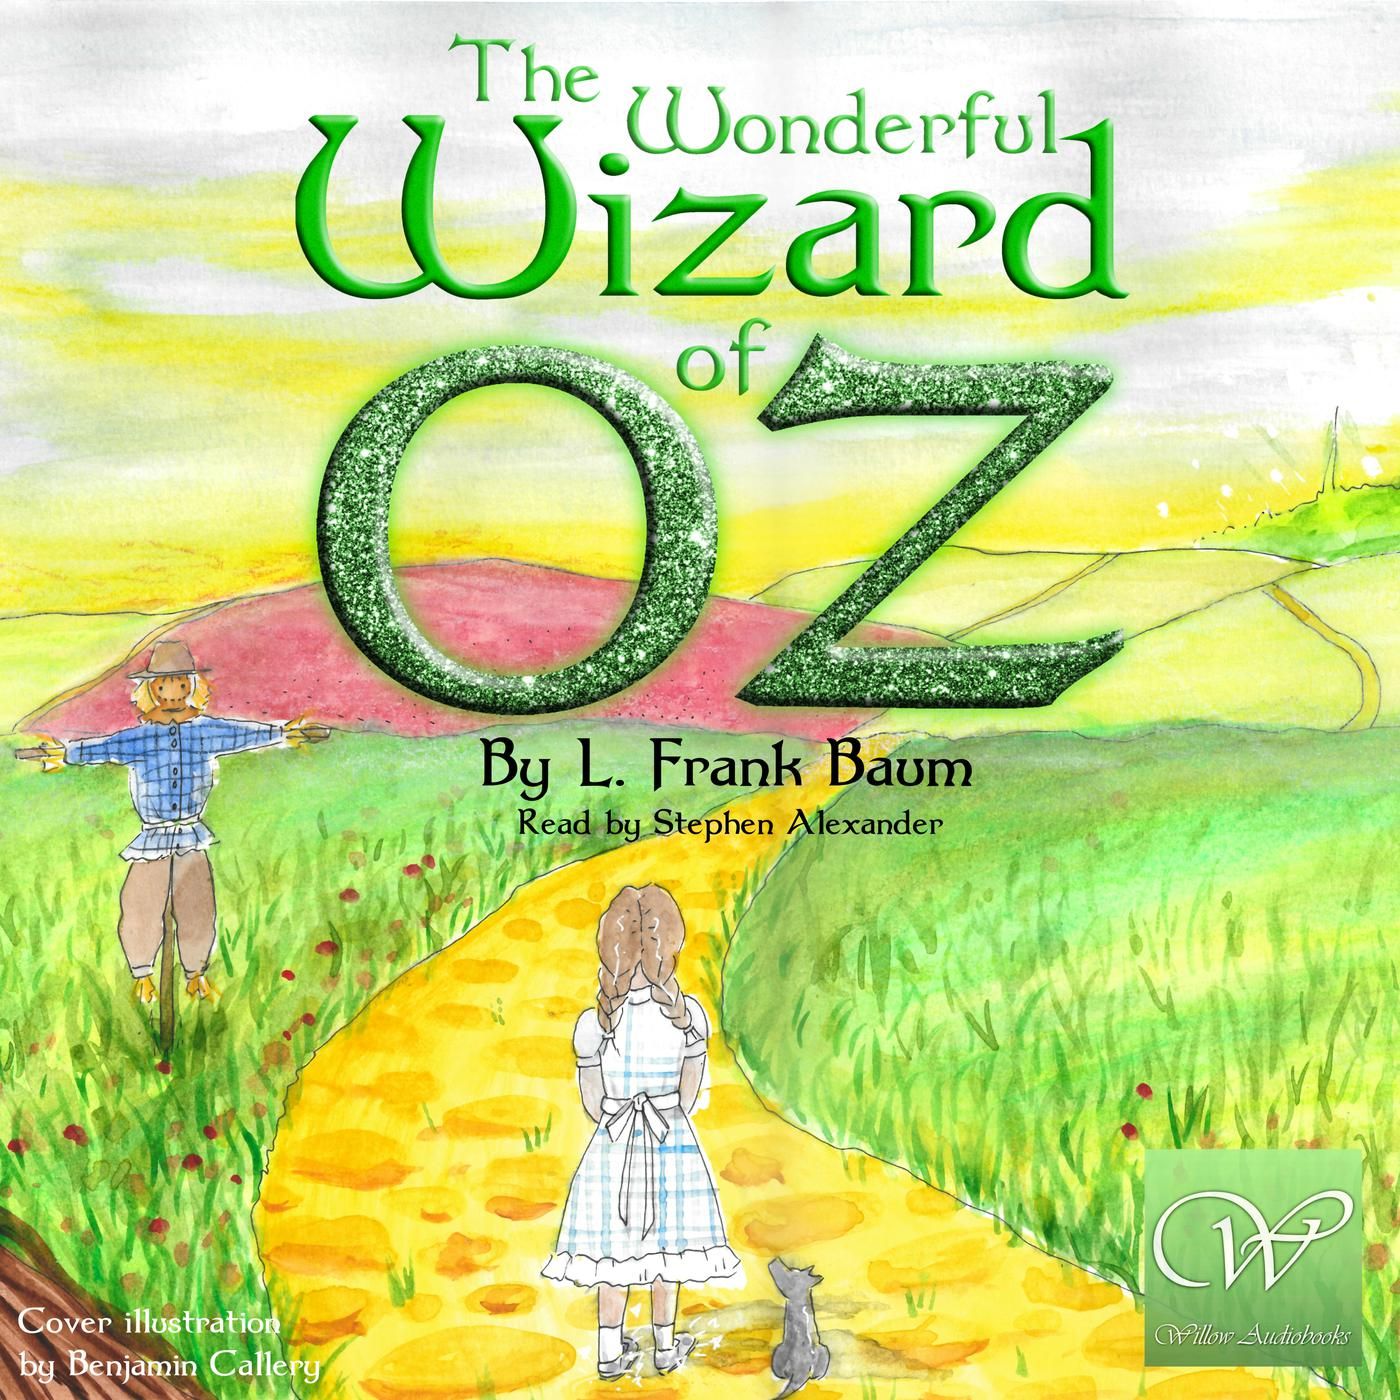 The Wonderful Wizard of Oz | Part 1 (Ch 1-3)